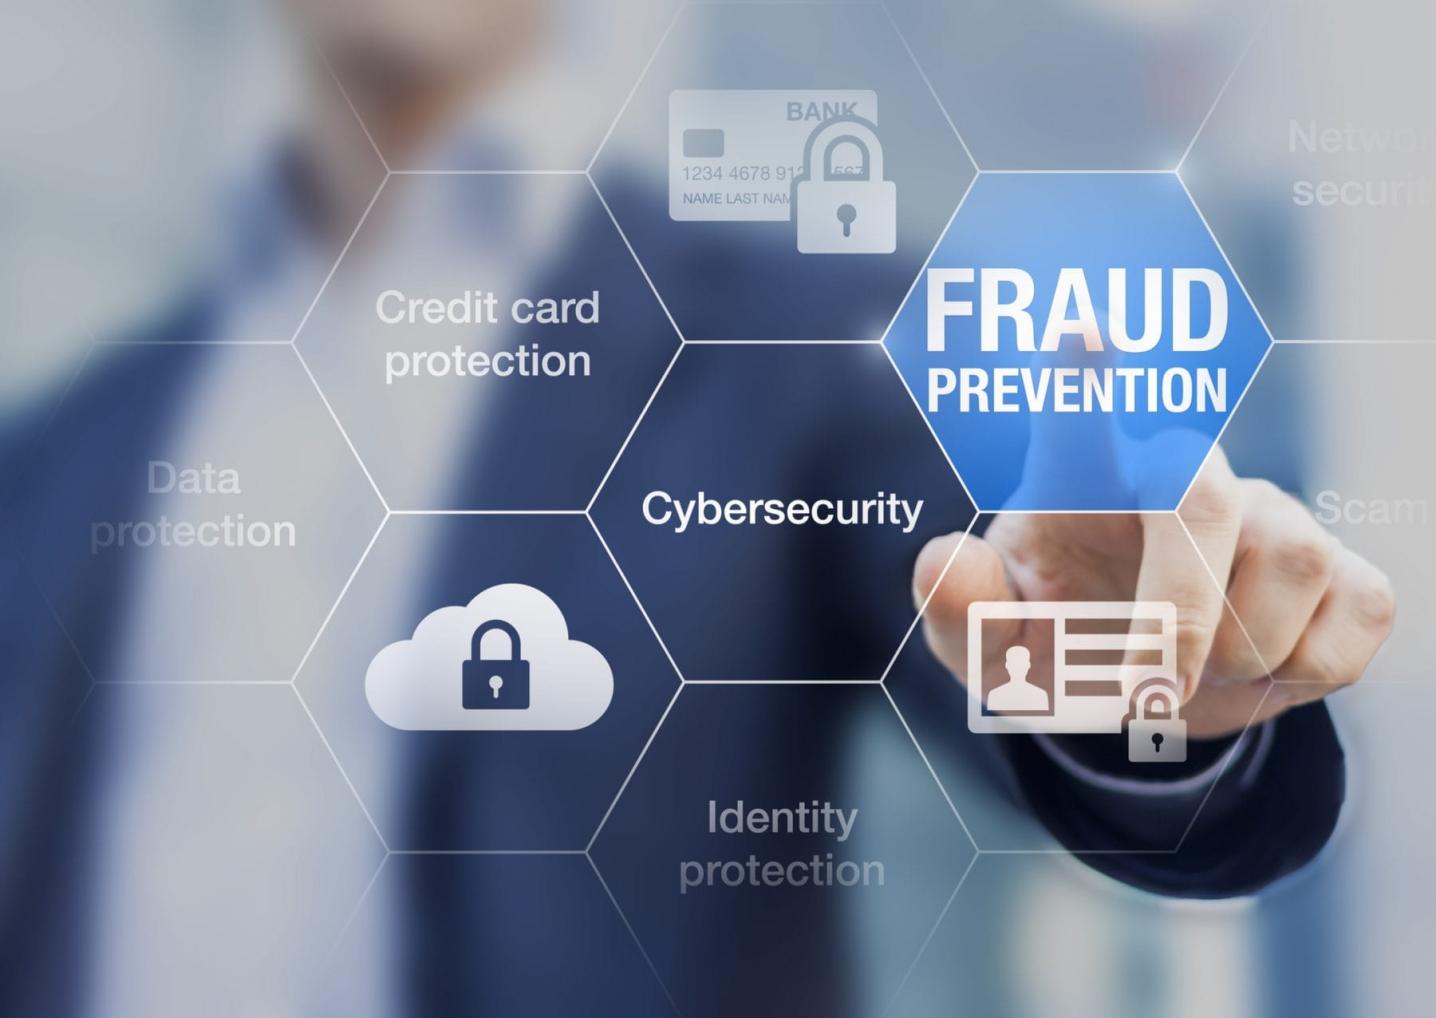 How Can Fraud Detection And Prevention Be Implemented Effectively In Different Industries?